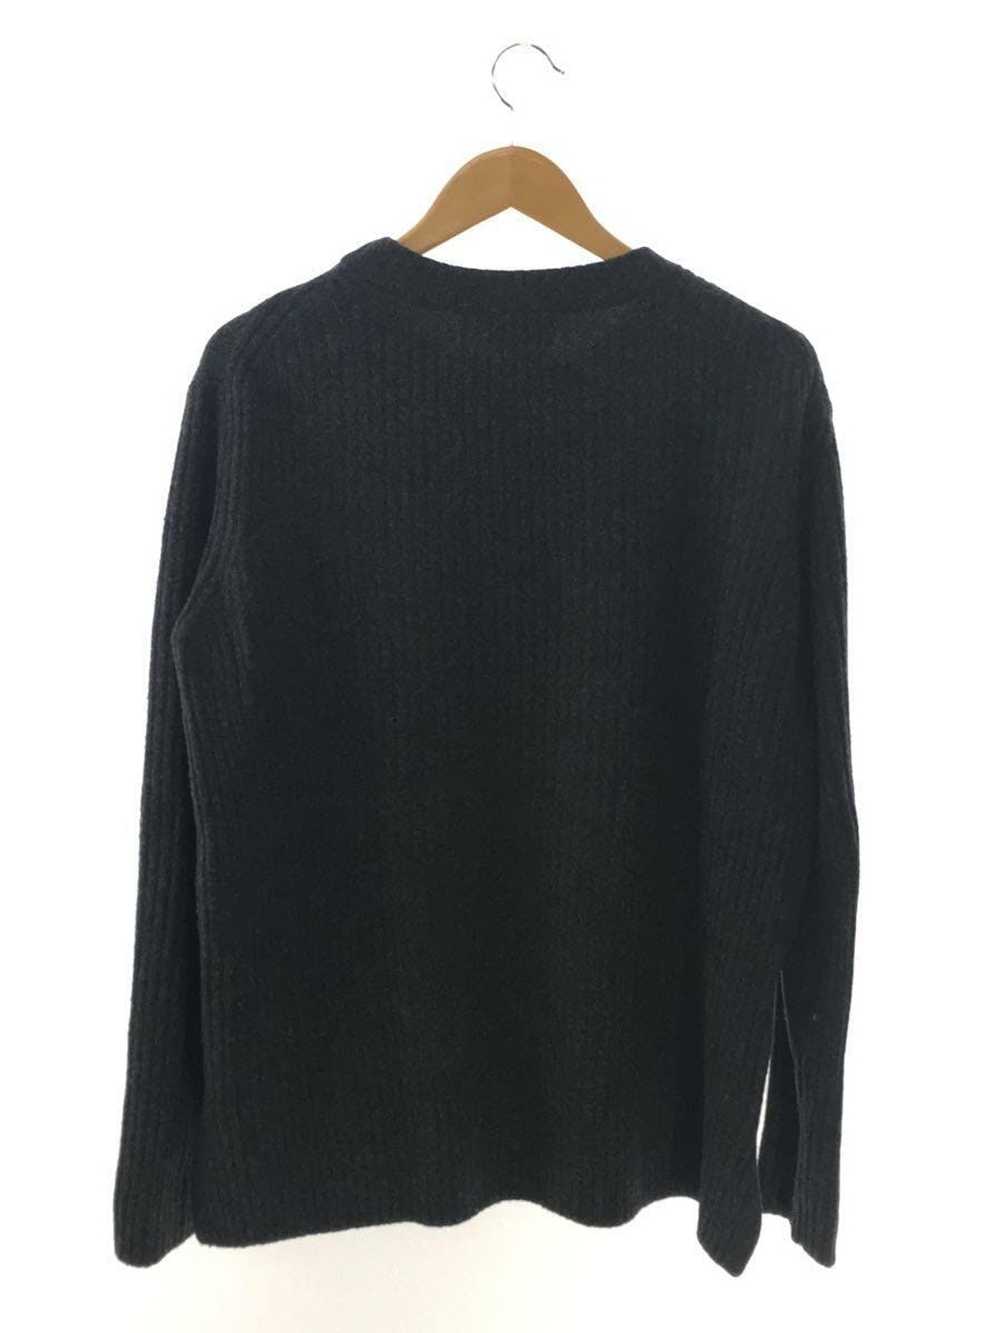 Acne Studios Ribbed Wool Knit Sweater - image 2